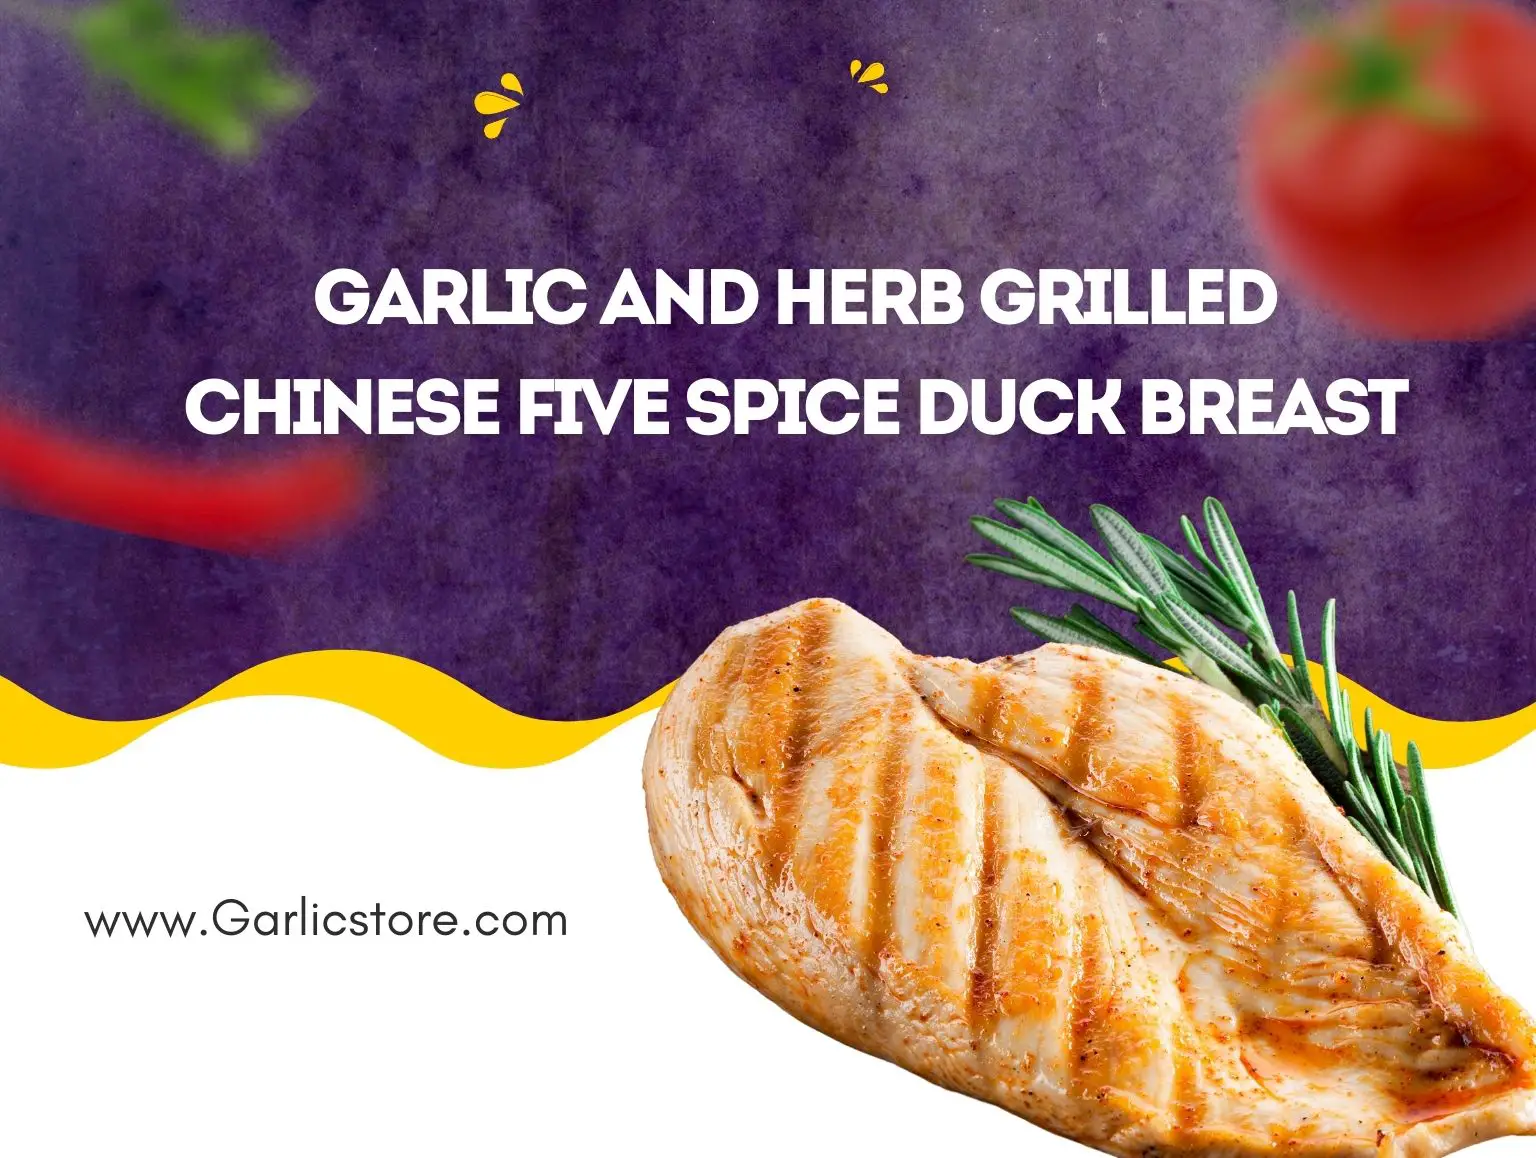 Garlic and Herb Grilled Chinese Five Spice Duck Breast